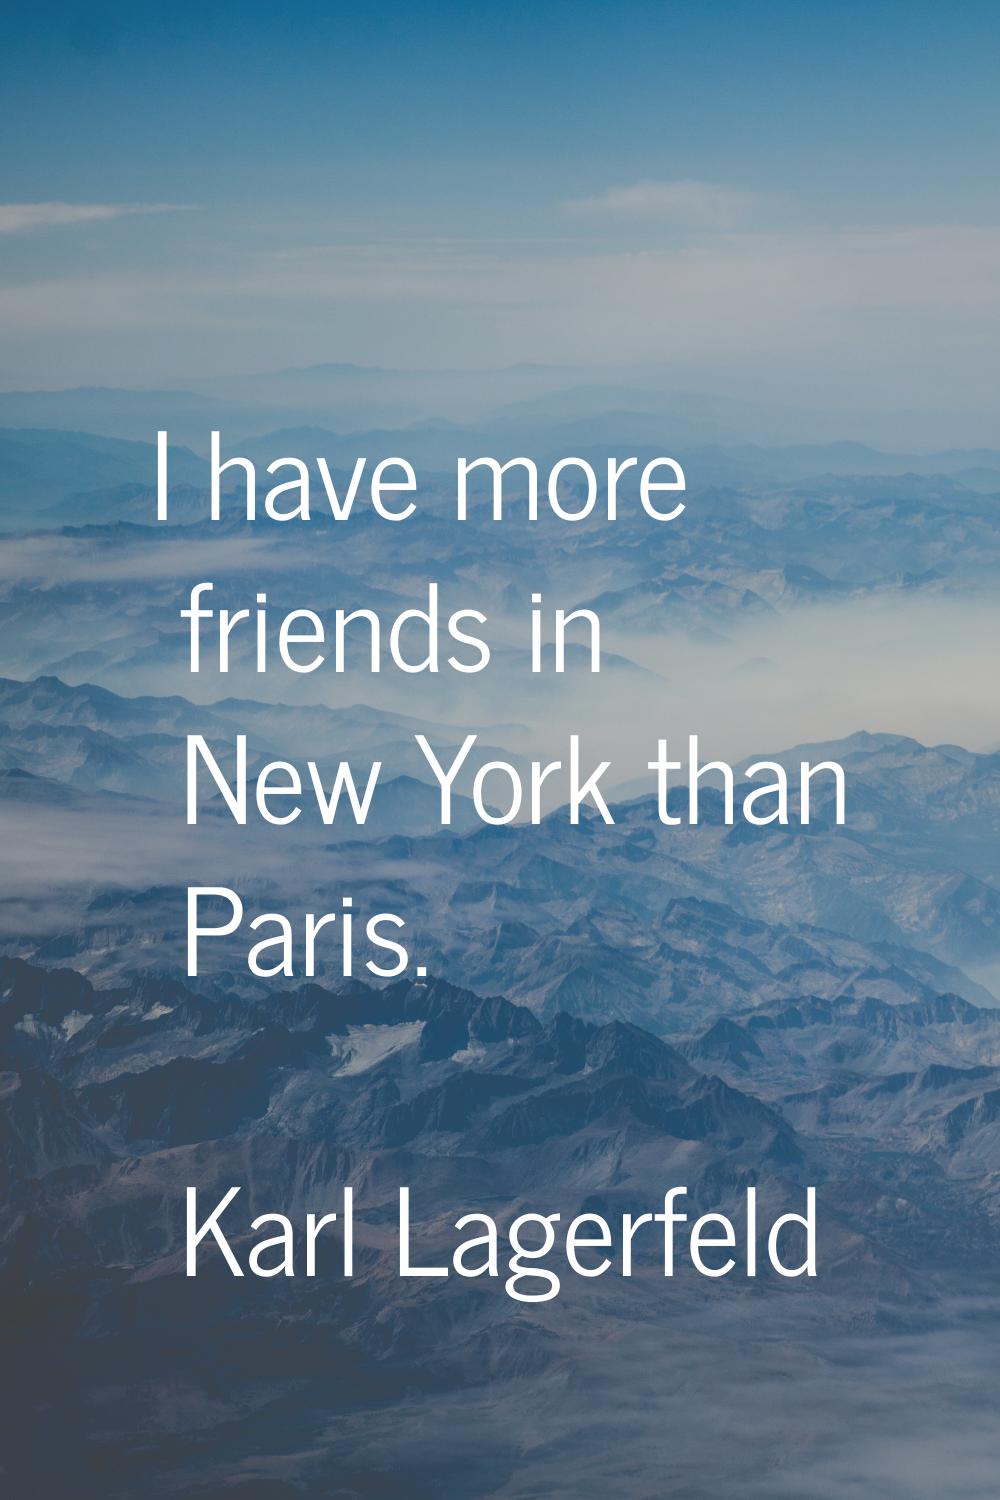 I have more friends in New York than Paris.